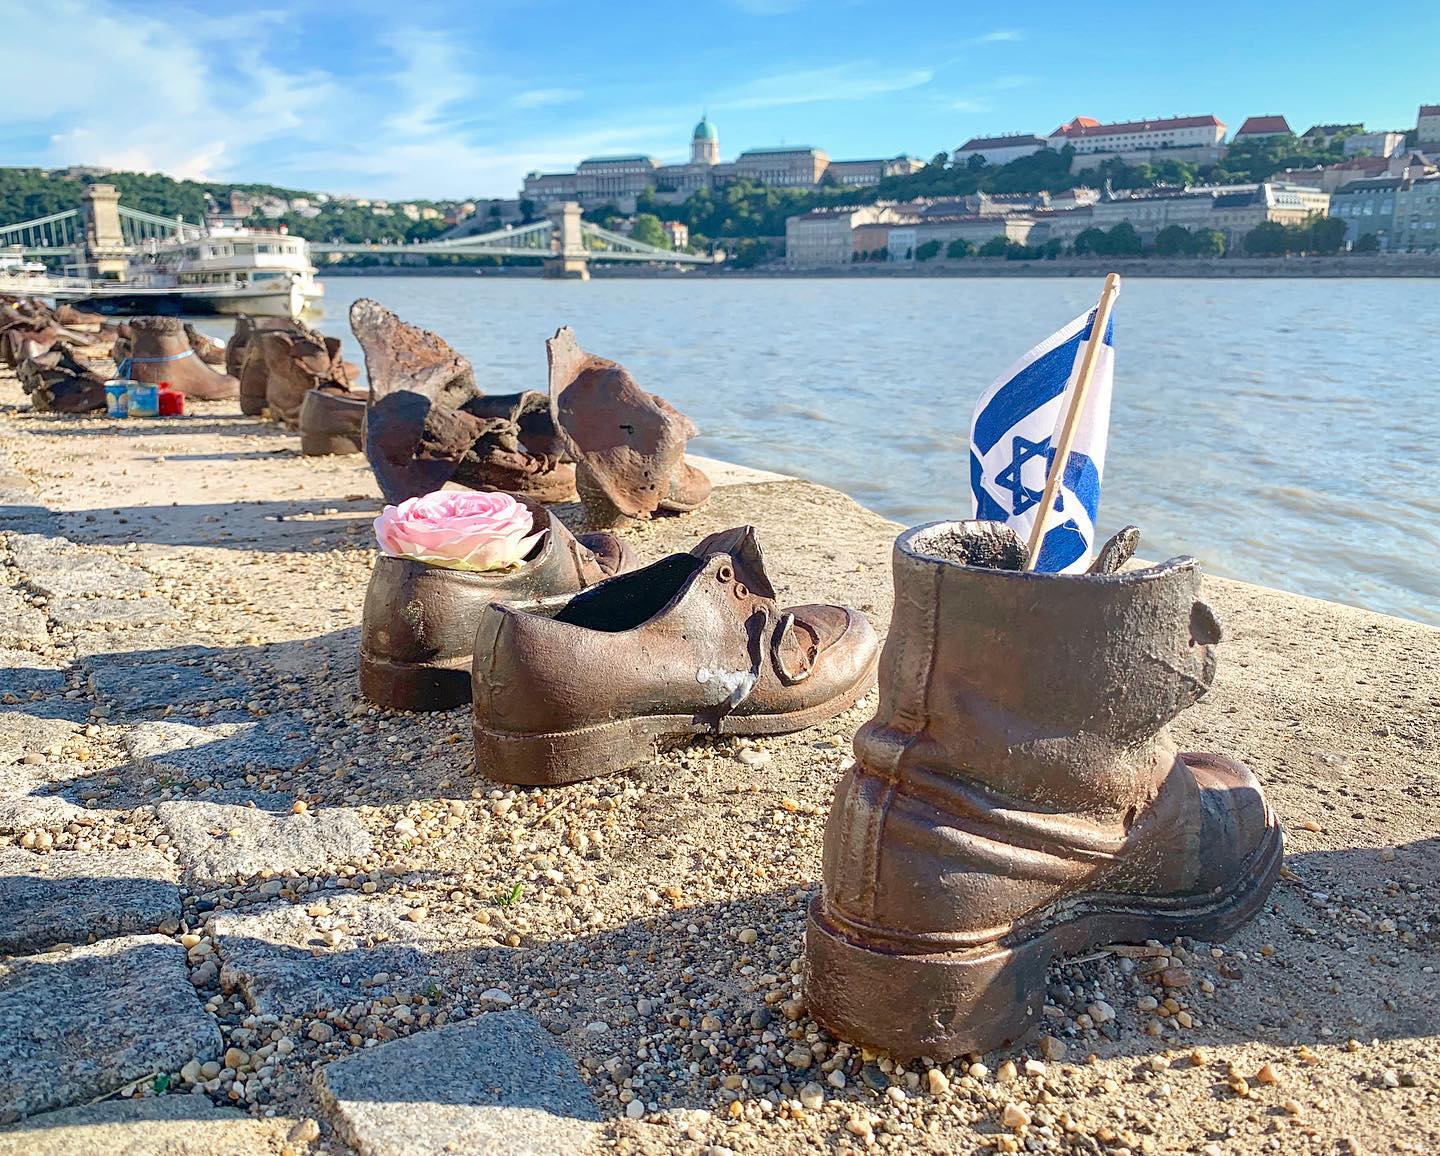 The Shoes on the Danube Bank is a memorial in Budapest, Hungary. Conceived by film director Can Togay, he created it on the east bank of the Danube River to honour the Jews who were killed by fascist Arrow Cross militiamen in Budapest during World War II. They were ordered to take off their shoes, and were shot at the edge of the water so that their bodies fell into the river and were carried away. It represents their shoes left behind on the bank.
.
.
#budapest #hungary #memorial